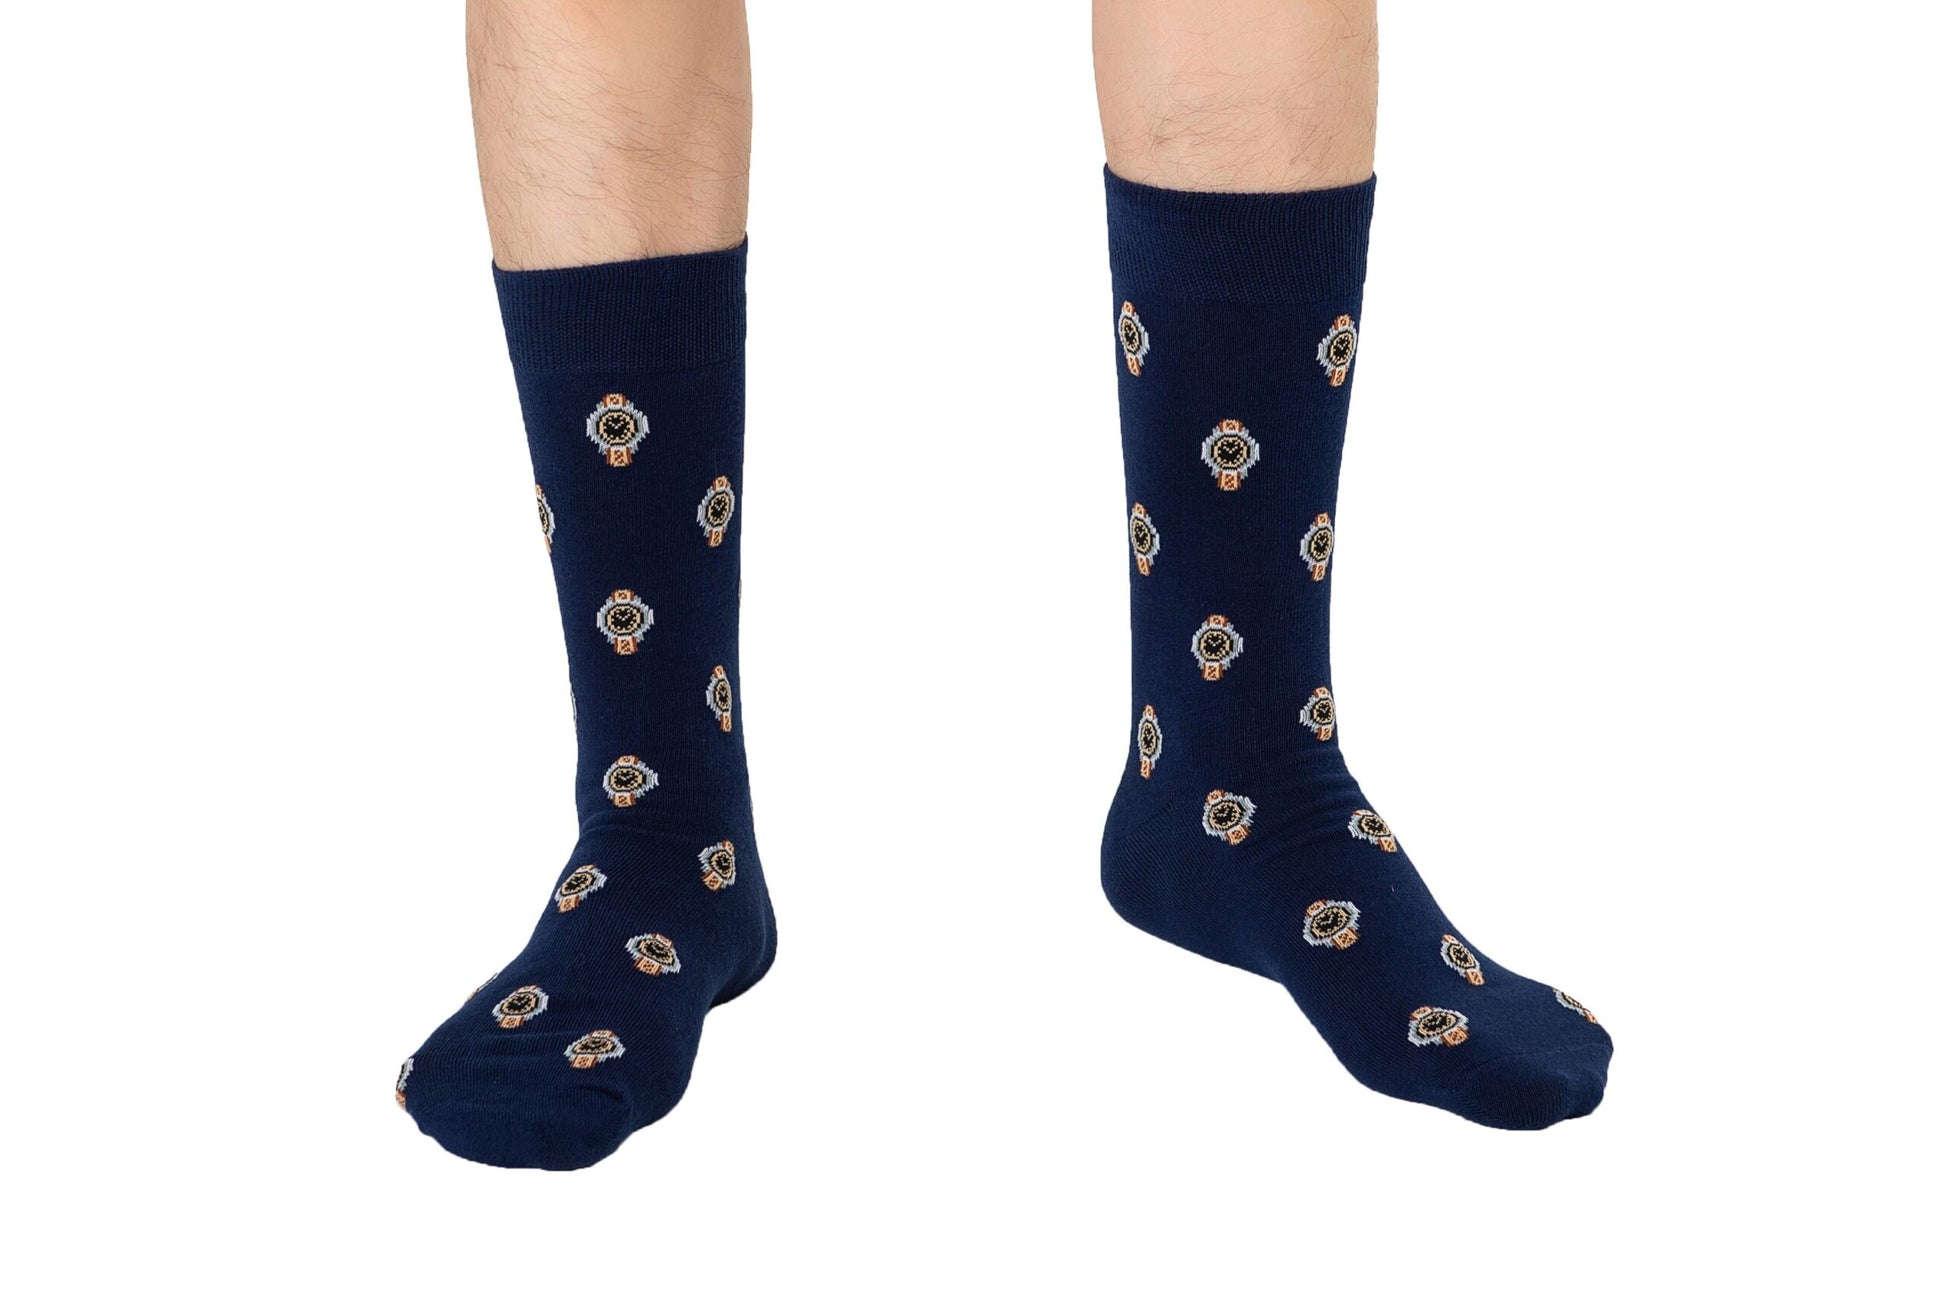 A pair of legs wearing Watch Socks with a timeless decorative pattern of gold and white emblems, isolated on a white background.